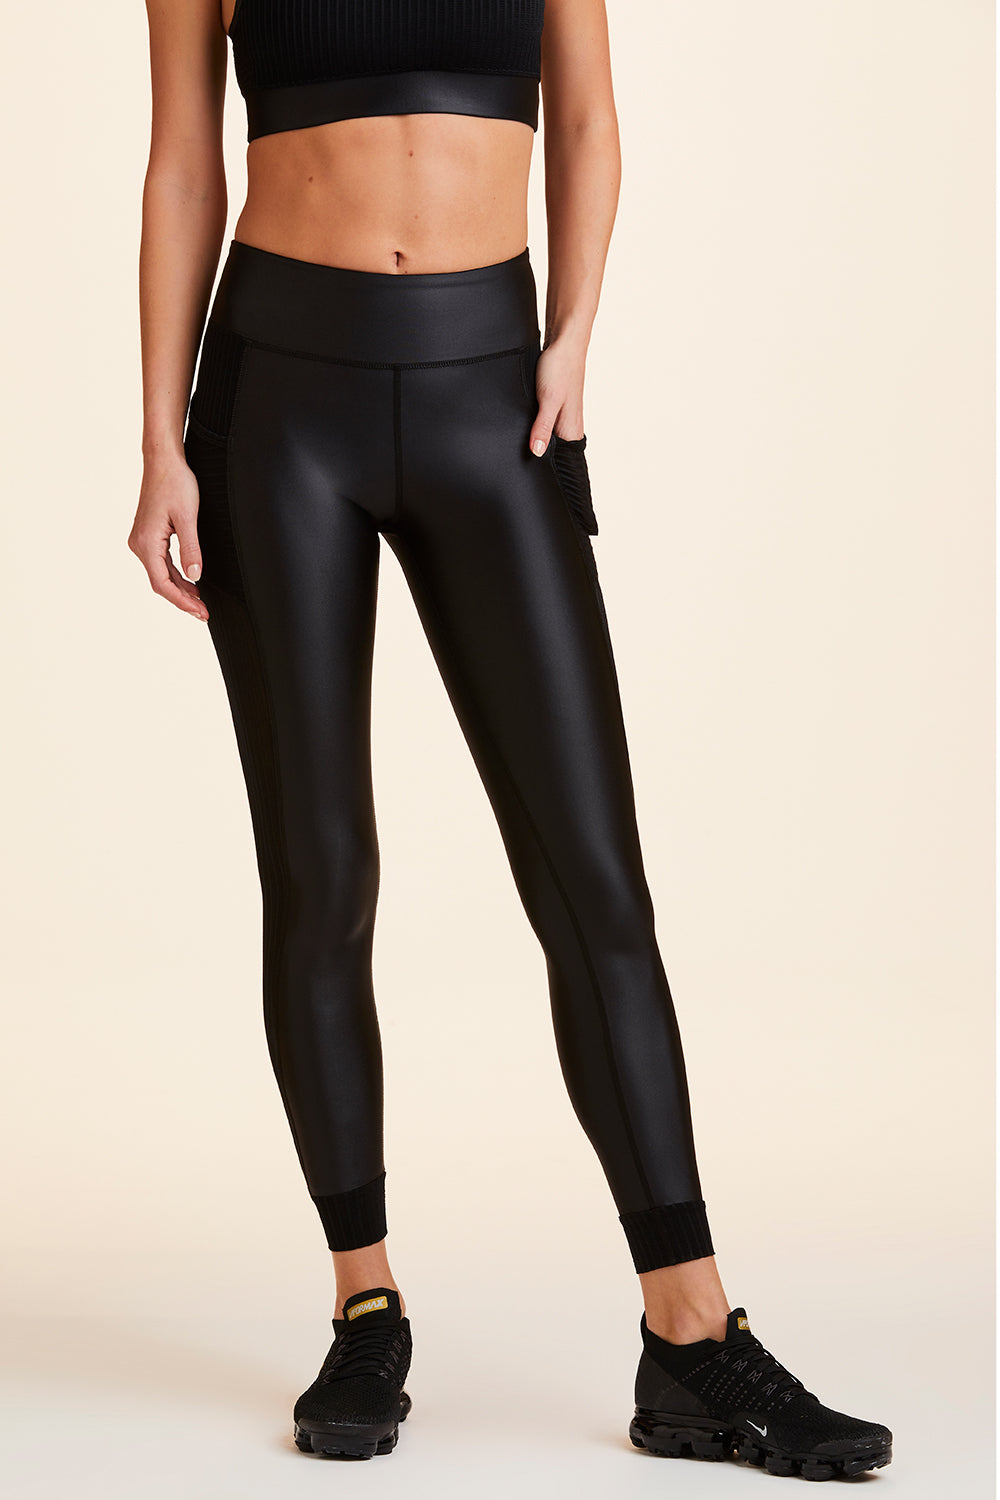 Buy Reebok Blue Lux High-Waisted Leggings from Next Luxembourg